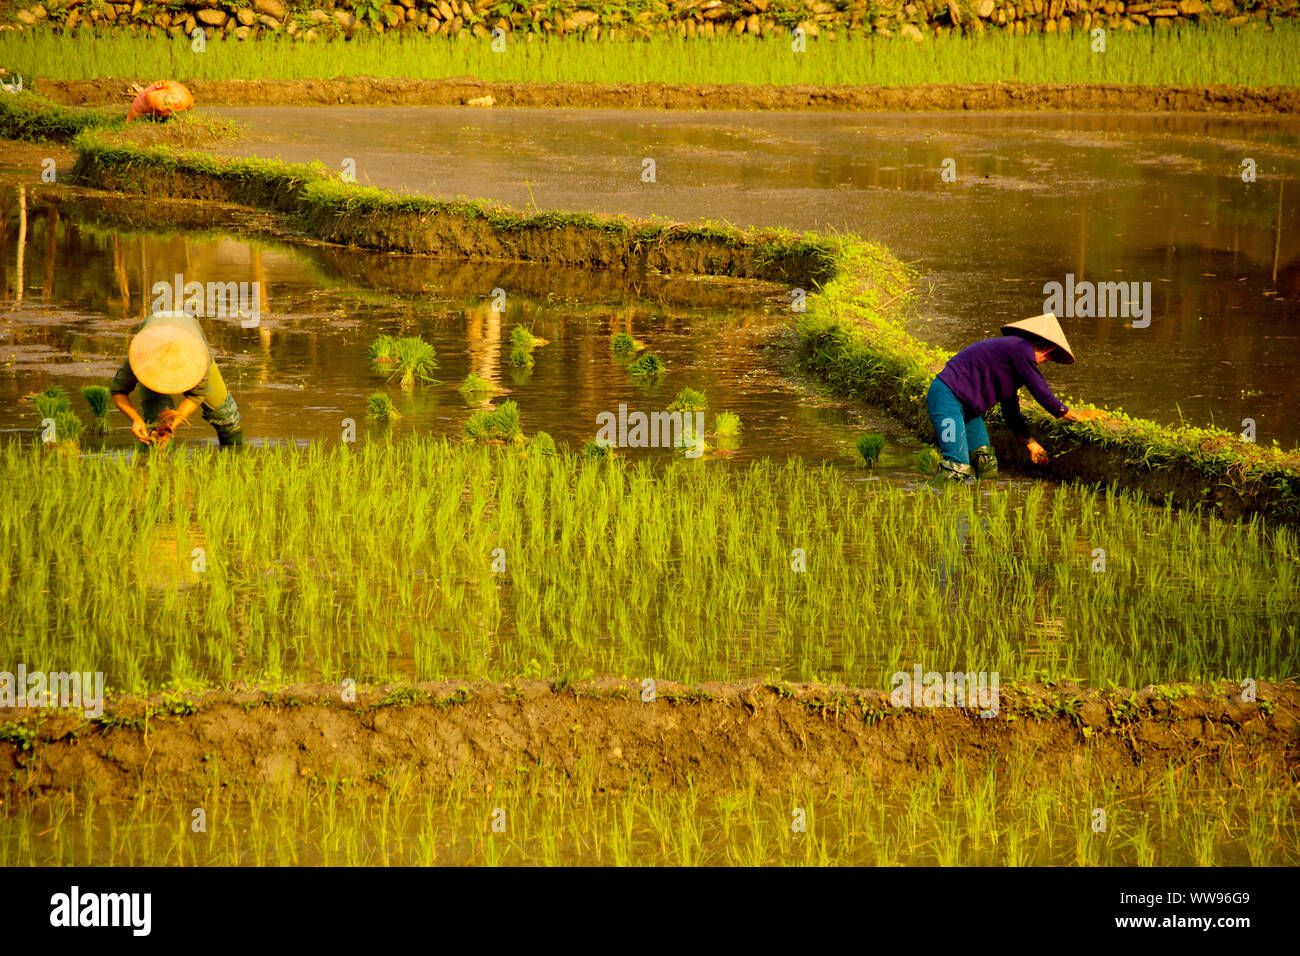 Peaceful scenery during the rice planting season in Vietnam showing the candid rural daily life and slow living Stock Photo